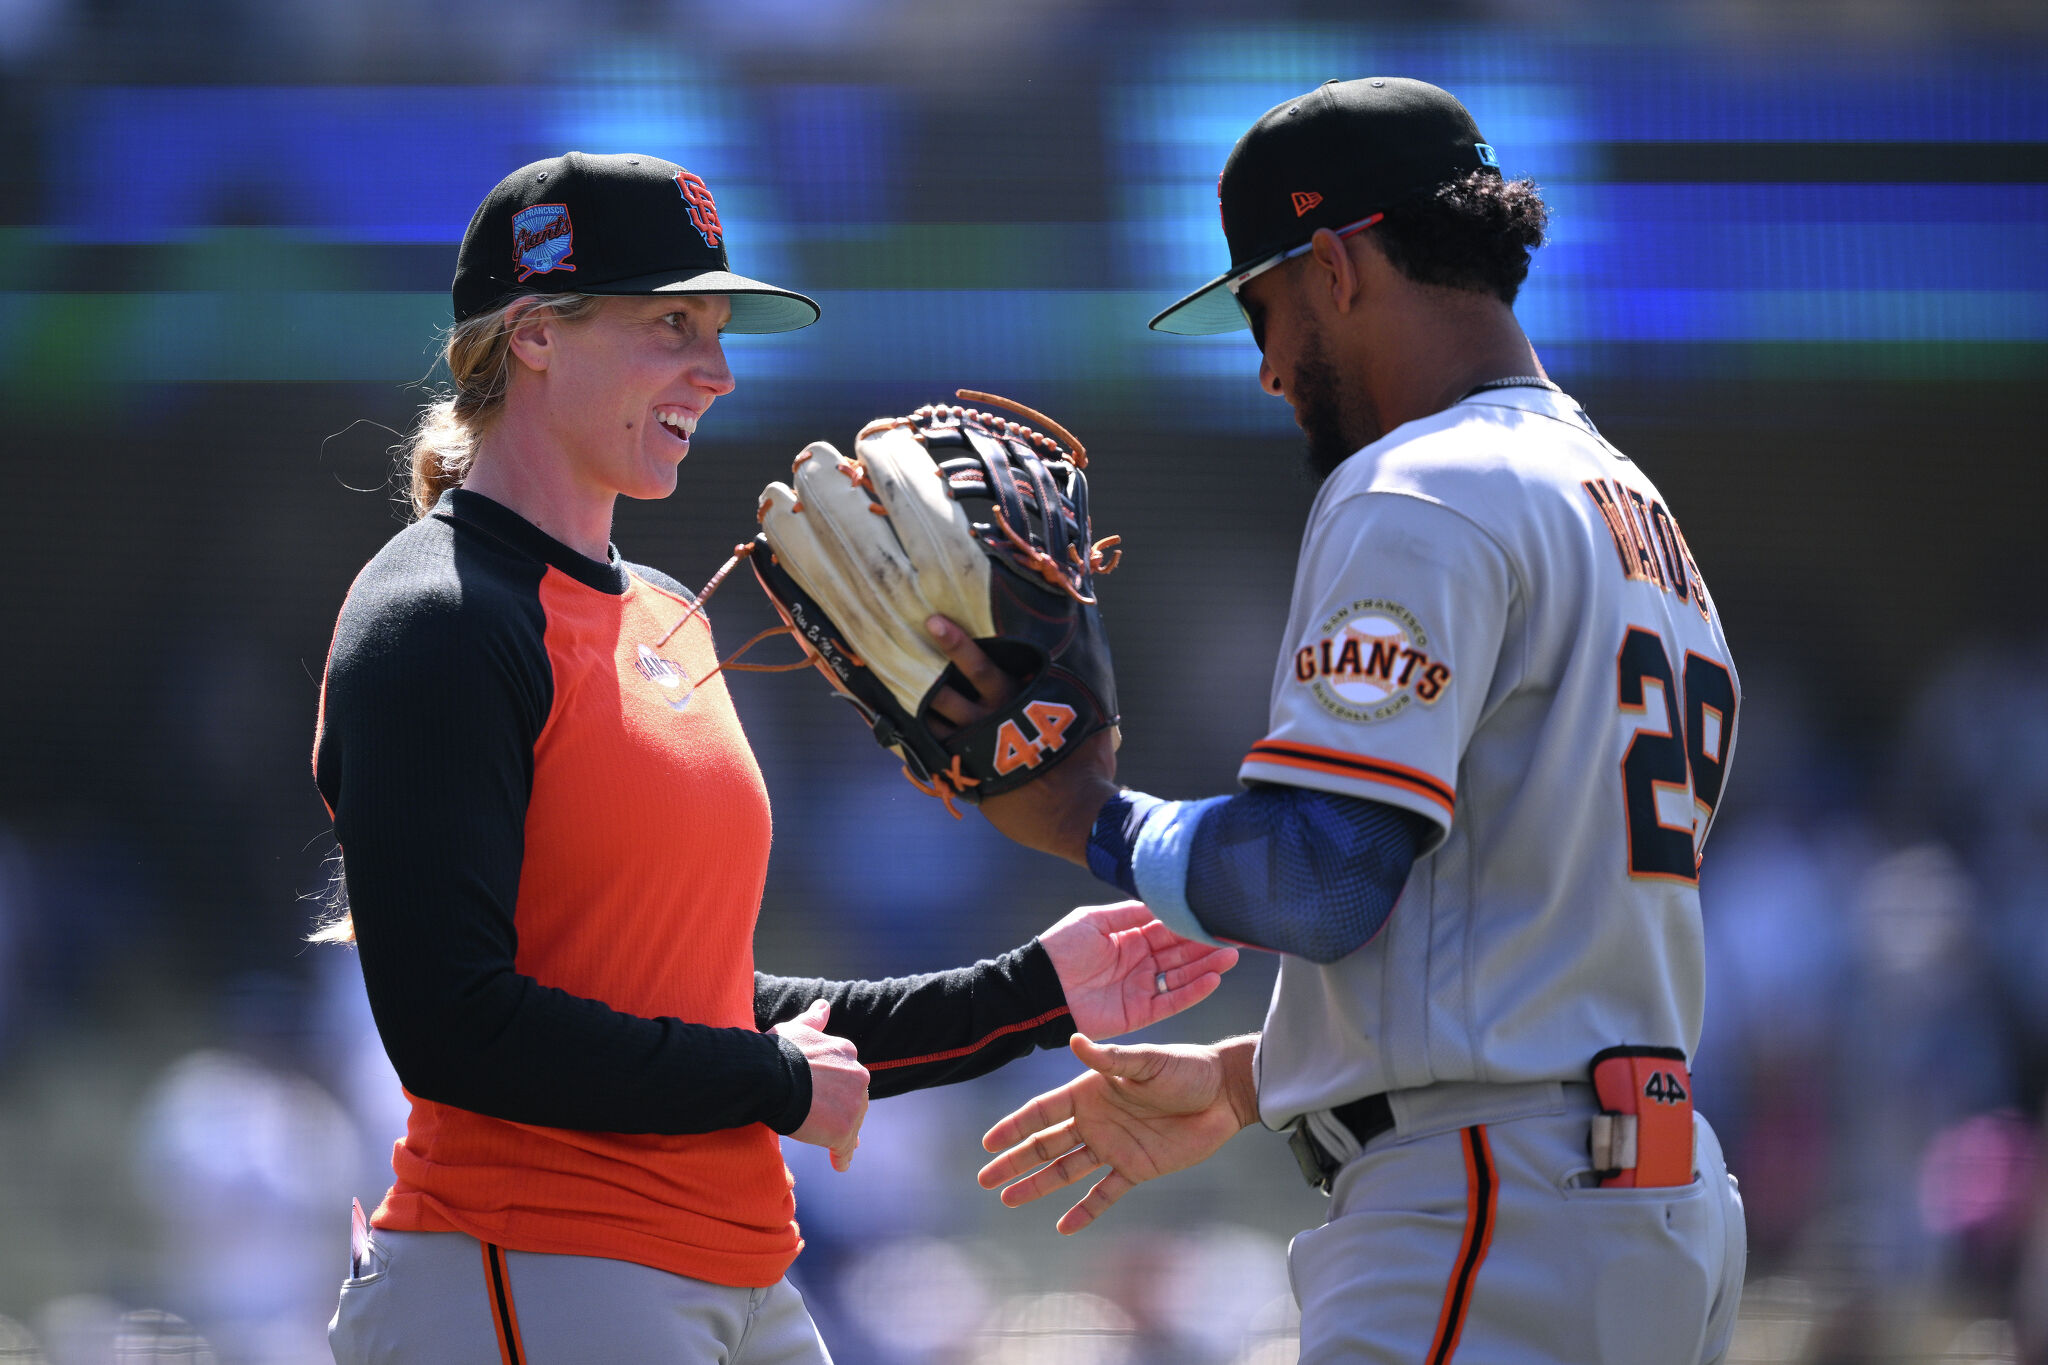 SF Giants have interviewed another internal candidate for managerial opening